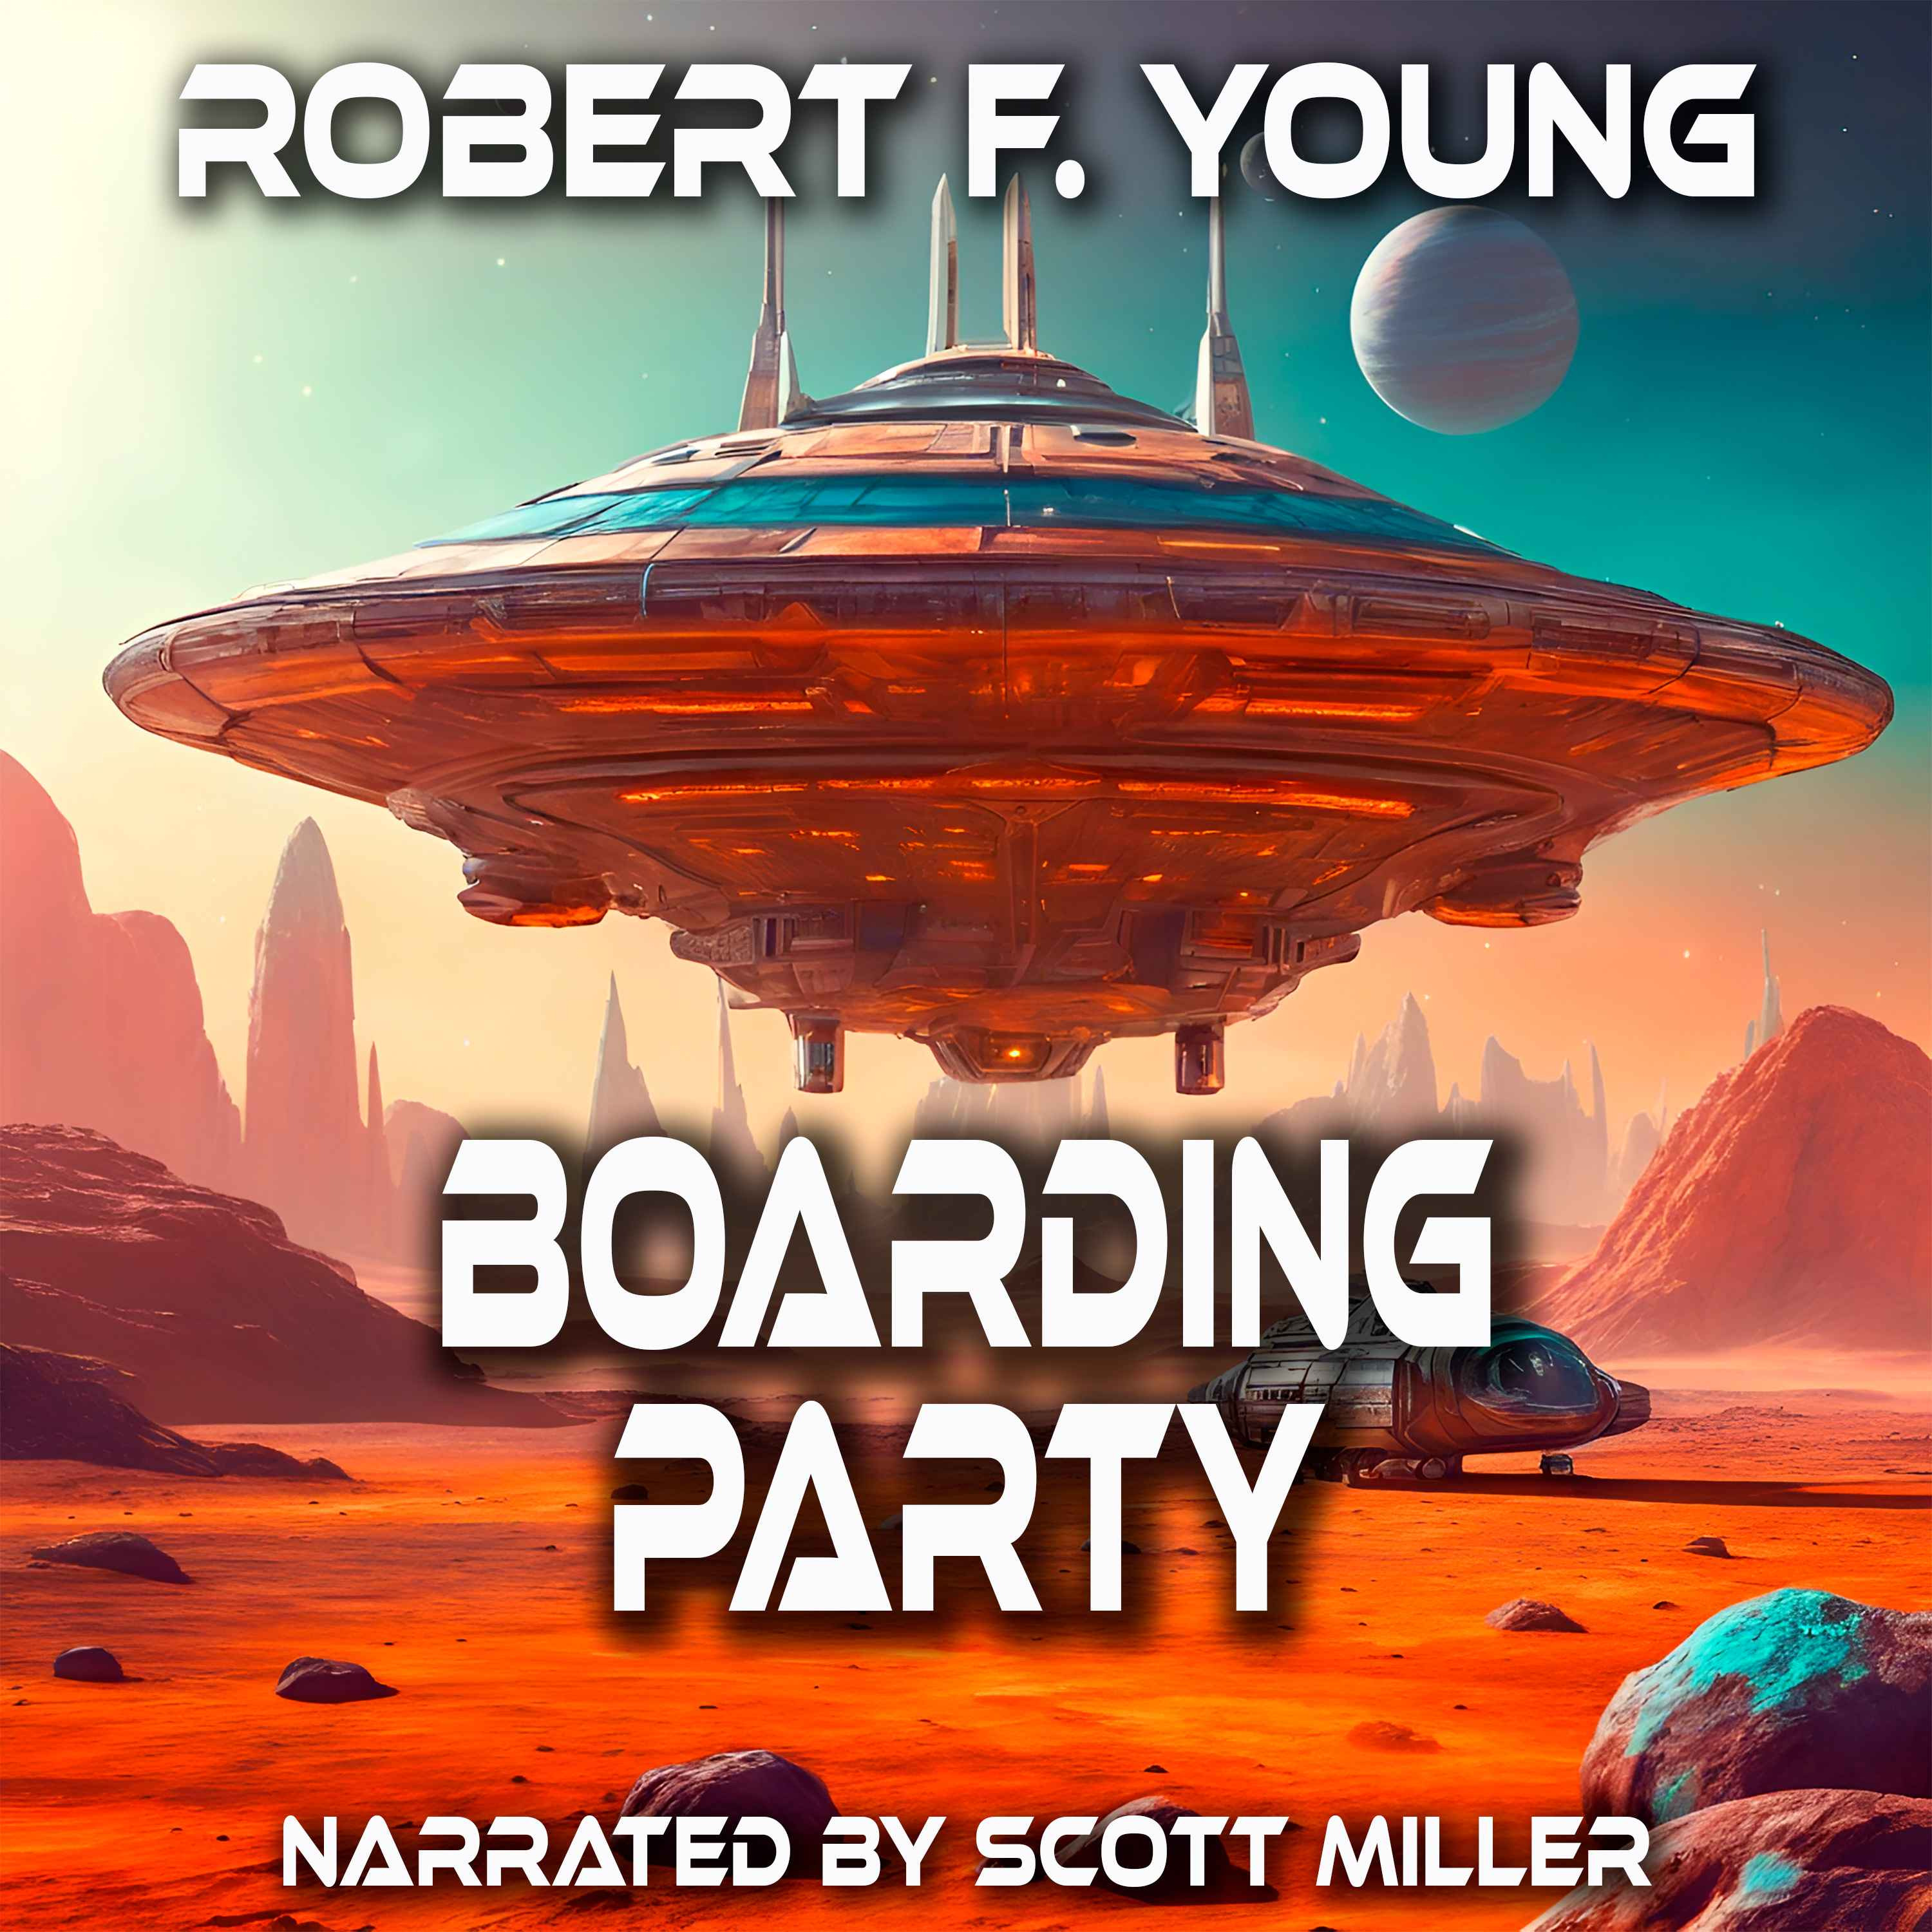 Boarding Party by Robert F. Young - Short Sci-Fi Story From the 1960s